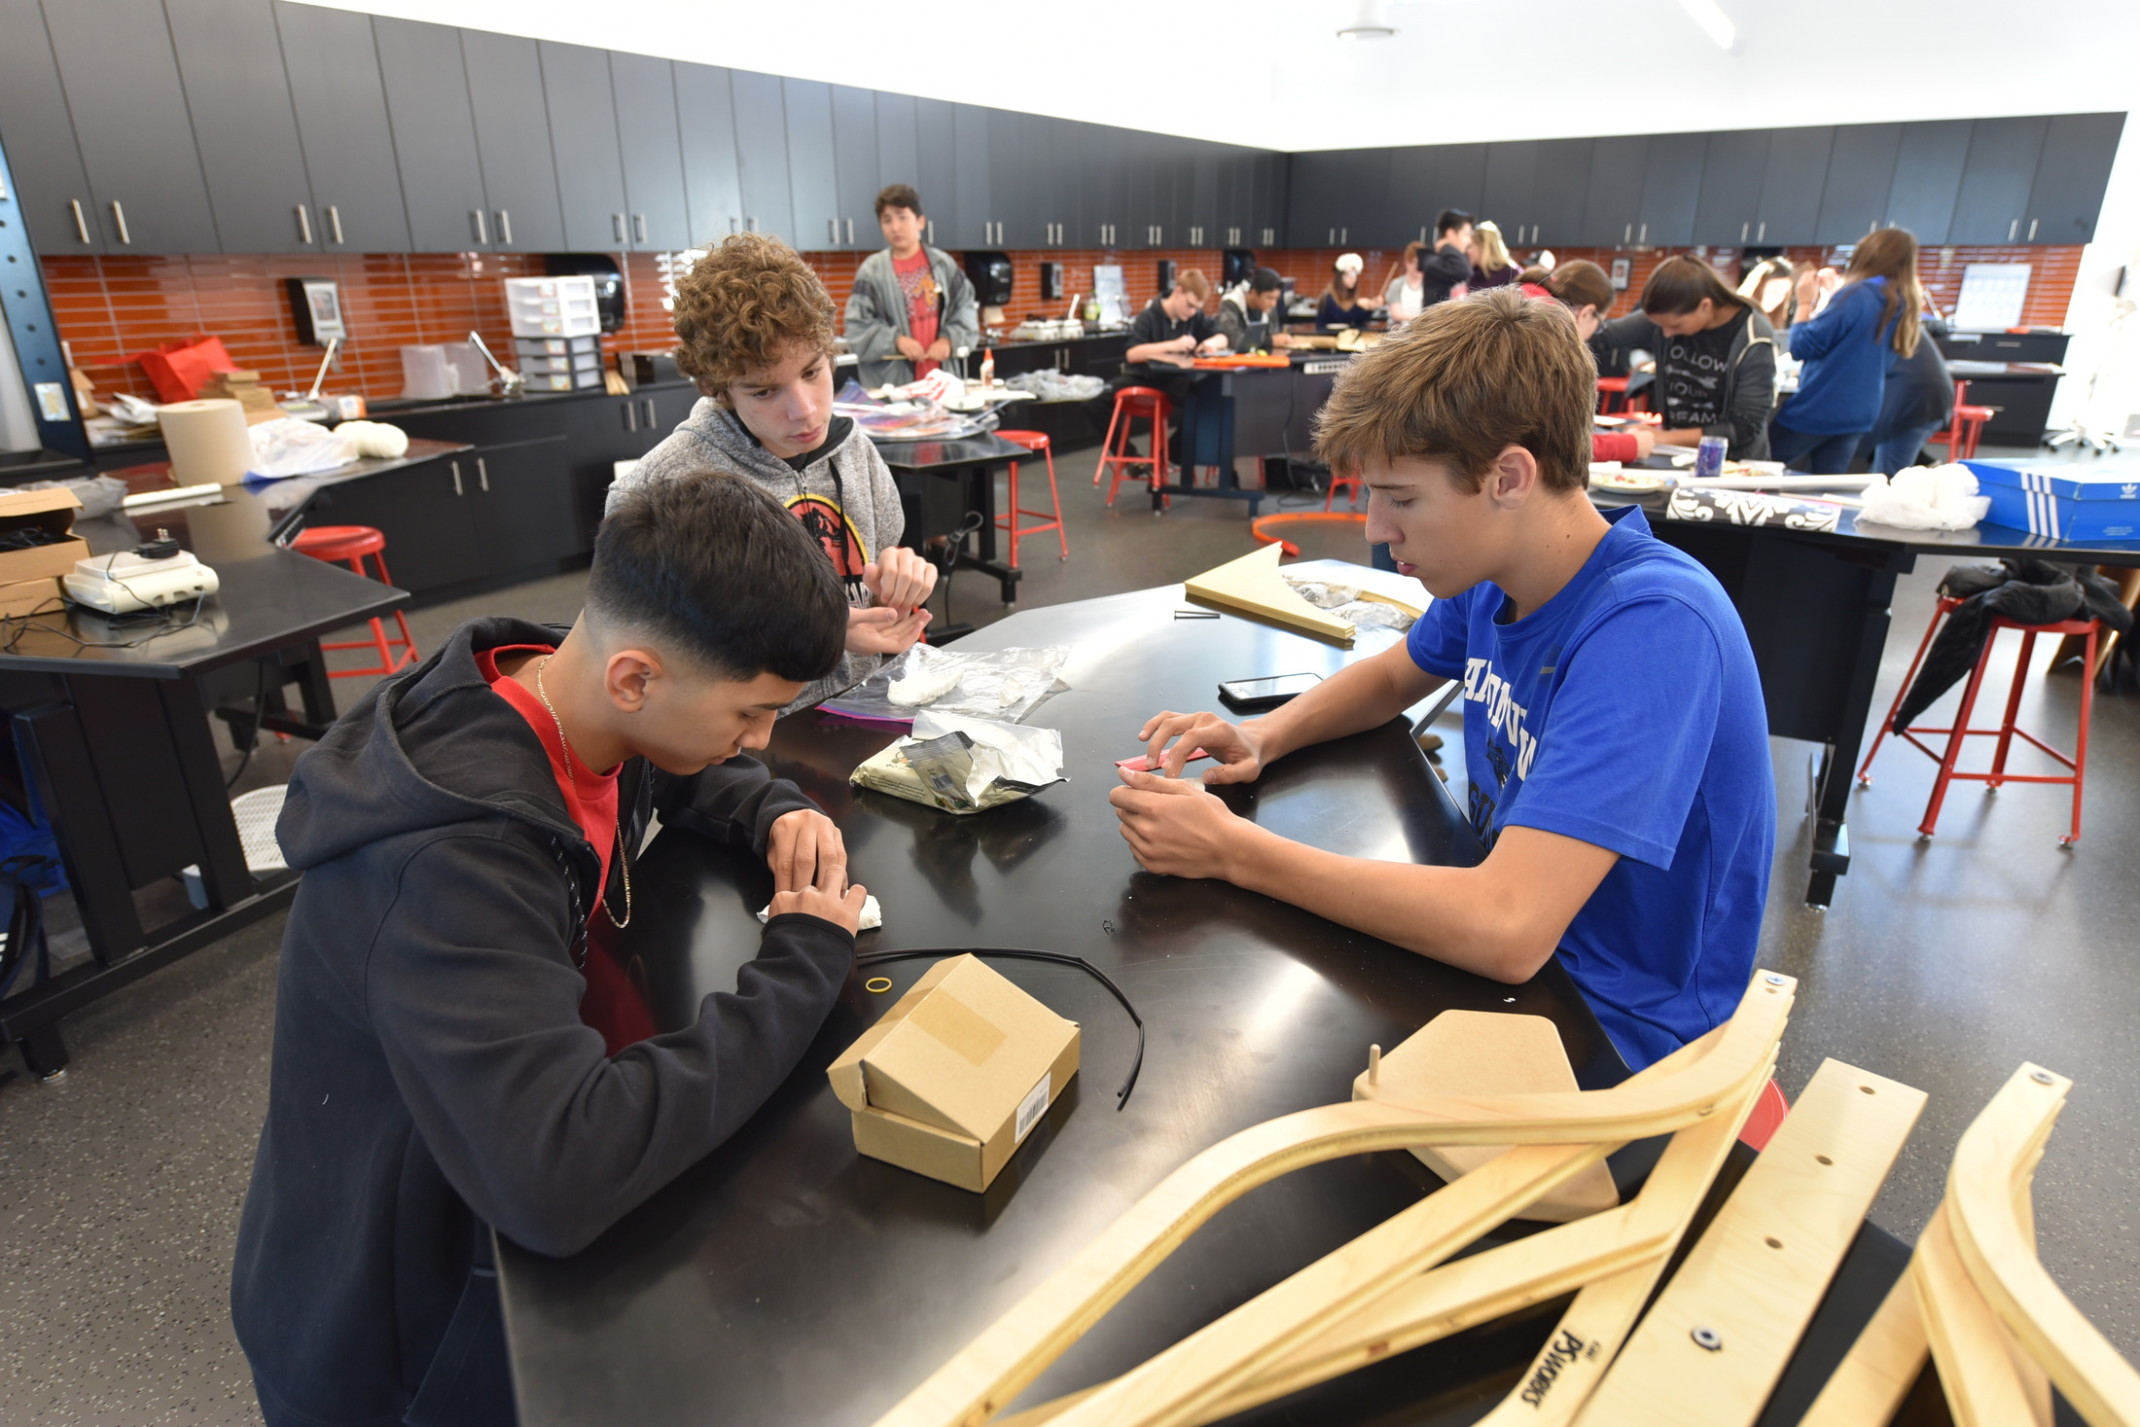 students working with wood pieces at a black rounded table in a classroom with black cabinets and orange tiled backsplash